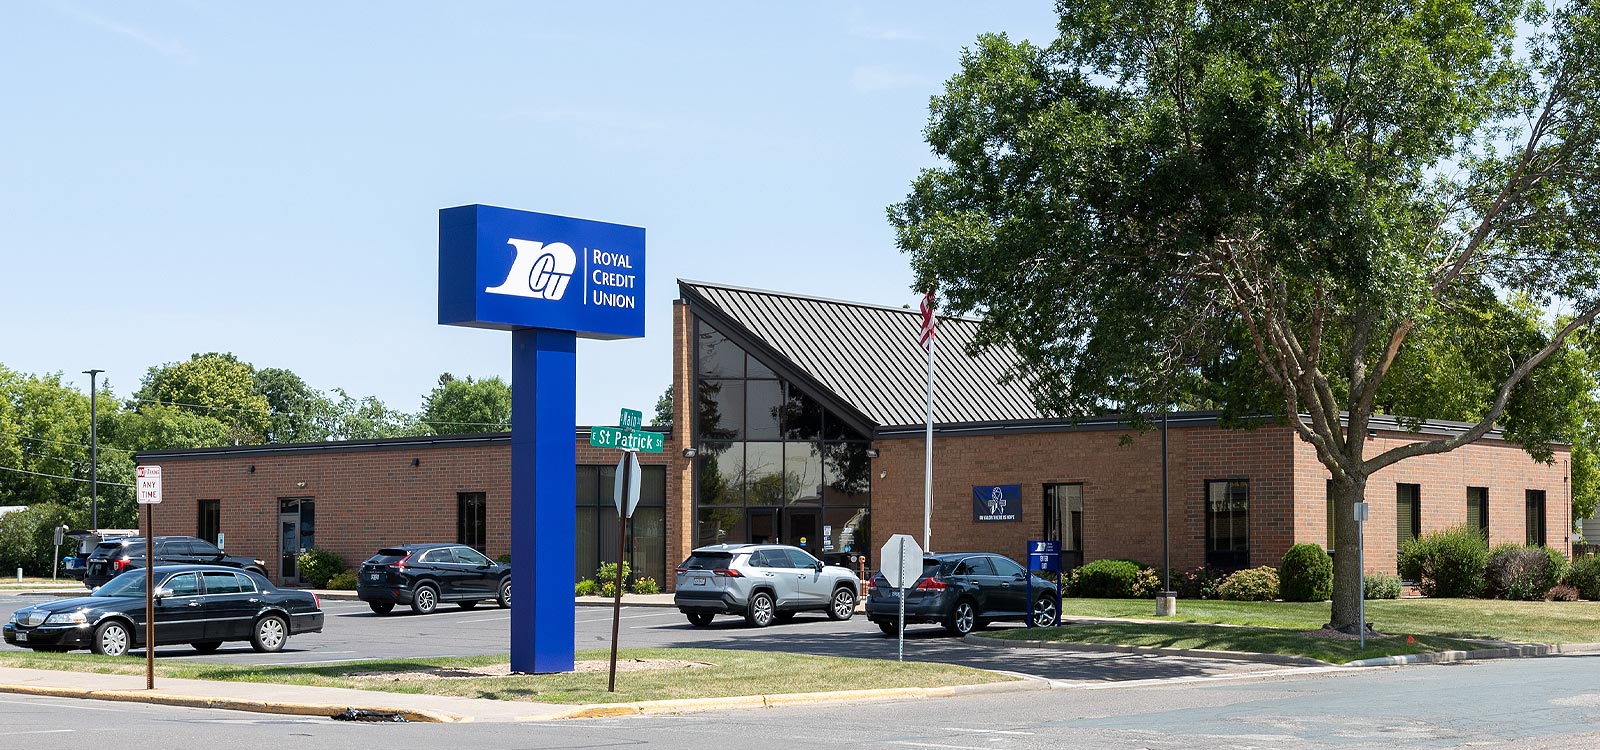 Royal Credit Union Office and Signage